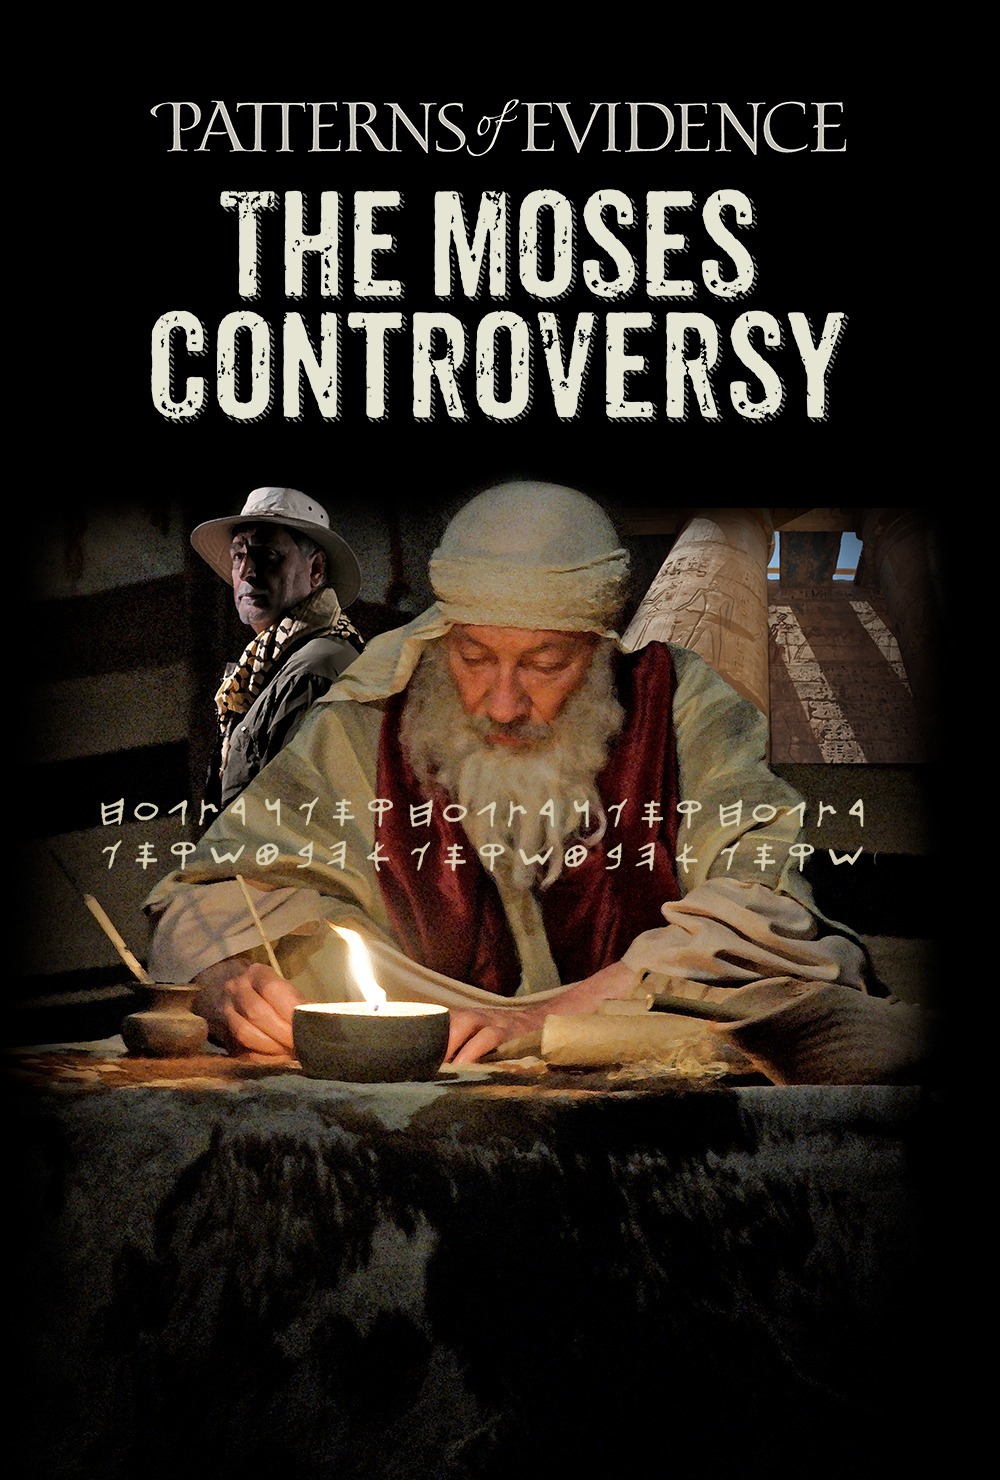 patterns evidence moses controversy 2019 download